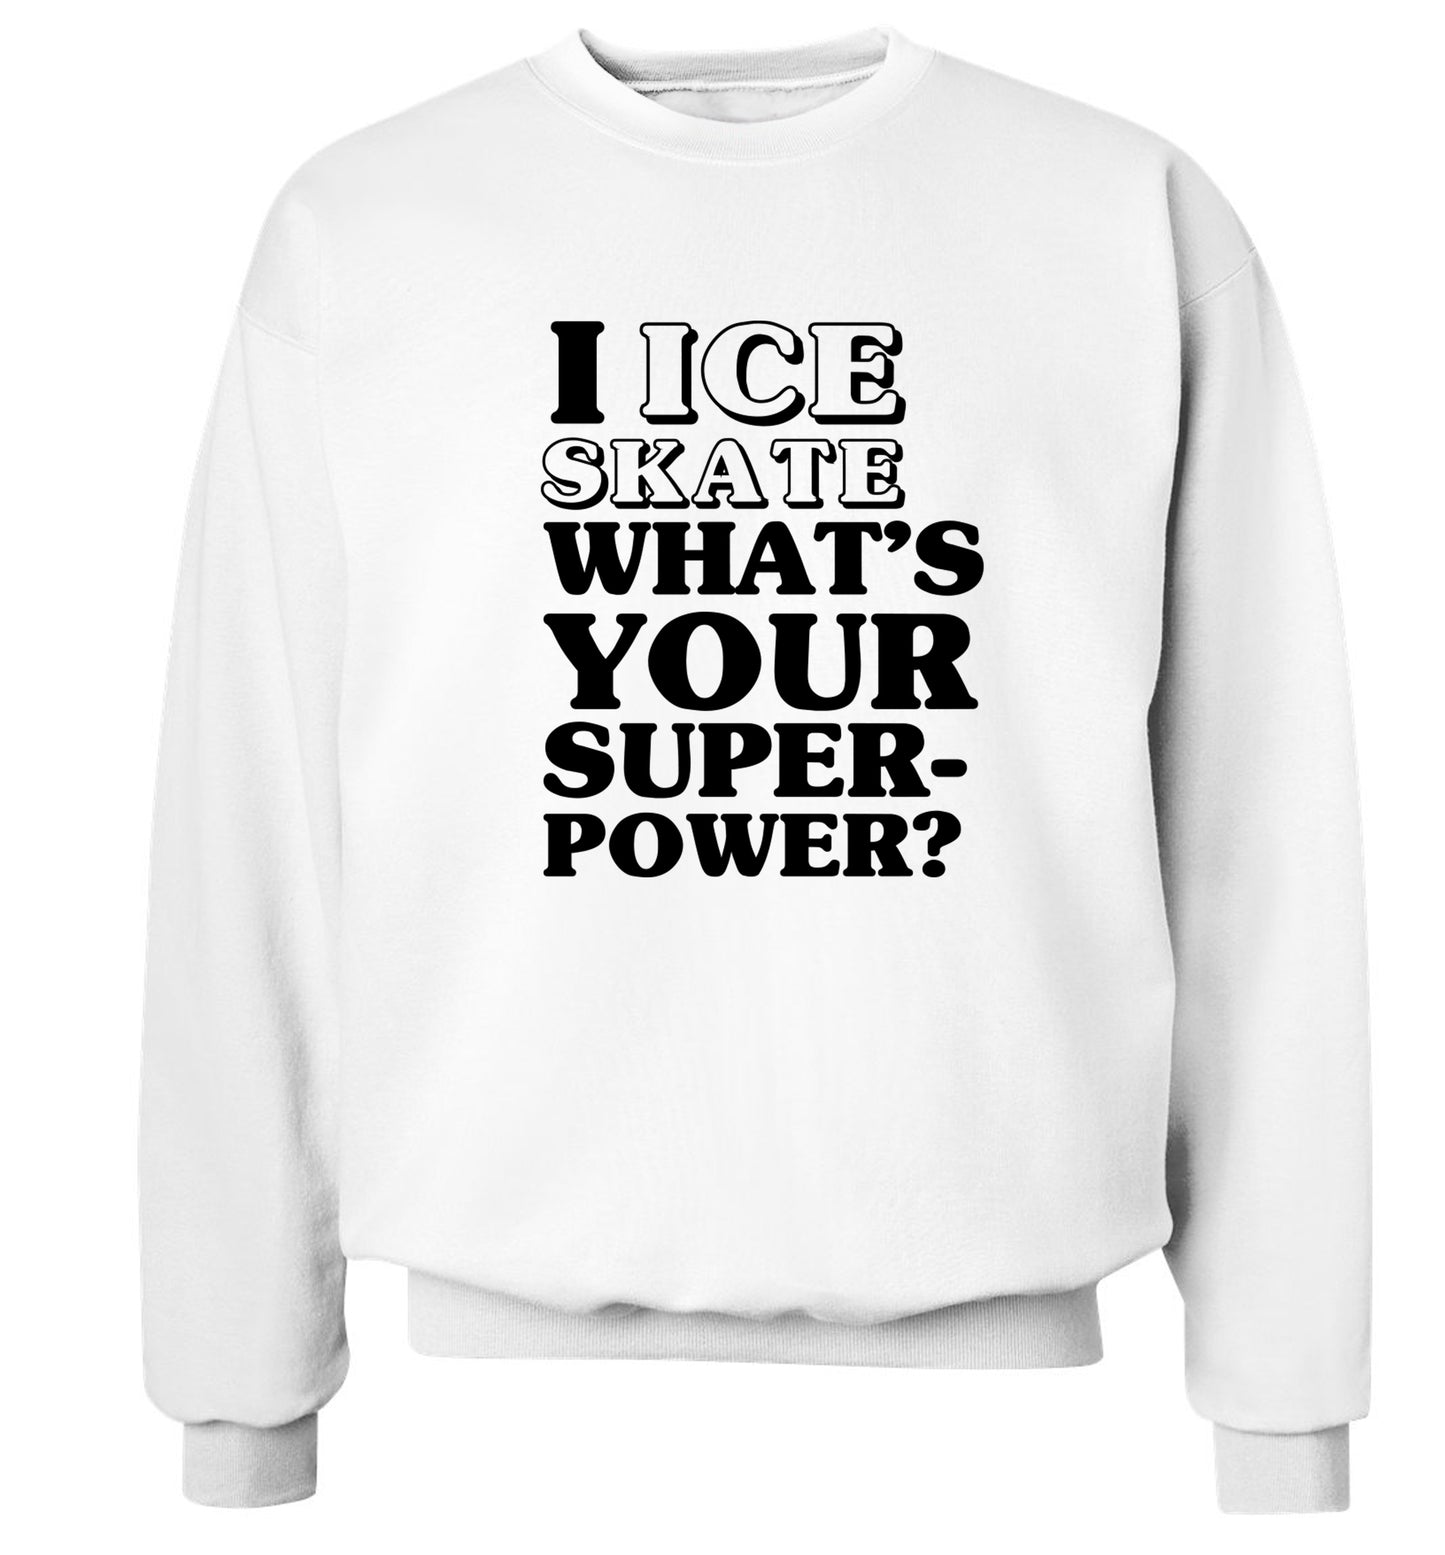 I ice skate what's your superpower? Adult's unisexwhite Sweater 2XL